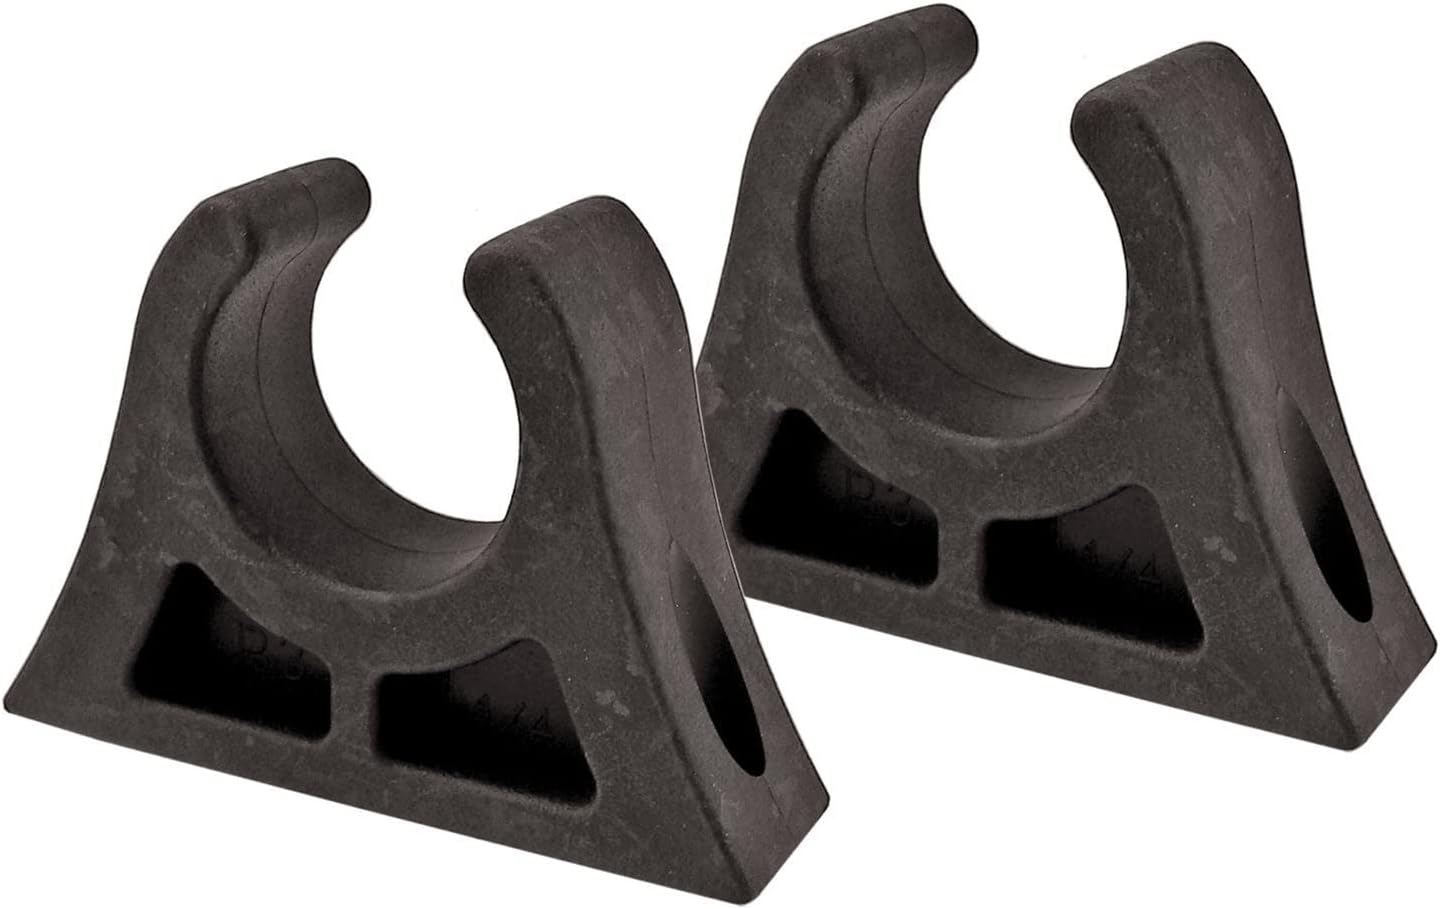 Propel Paddle Kayak Paddle Clips Rubber